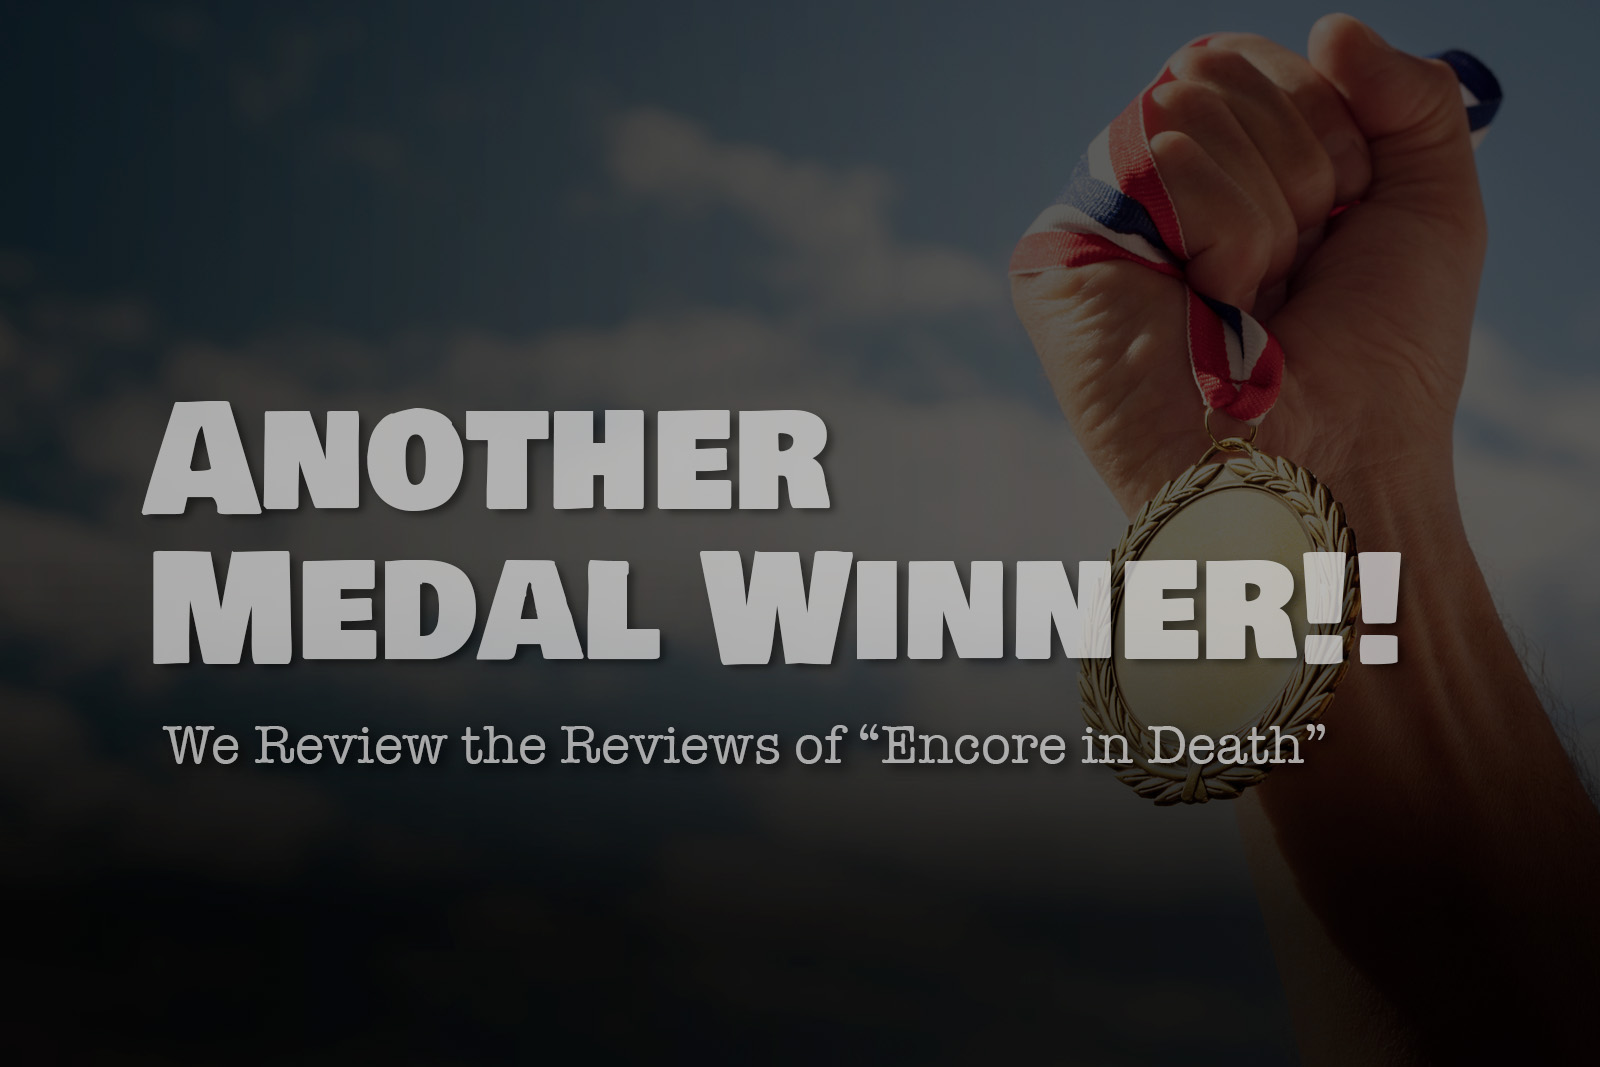 Another Medal Winner! We Review the Reviews of “Encore in Death”